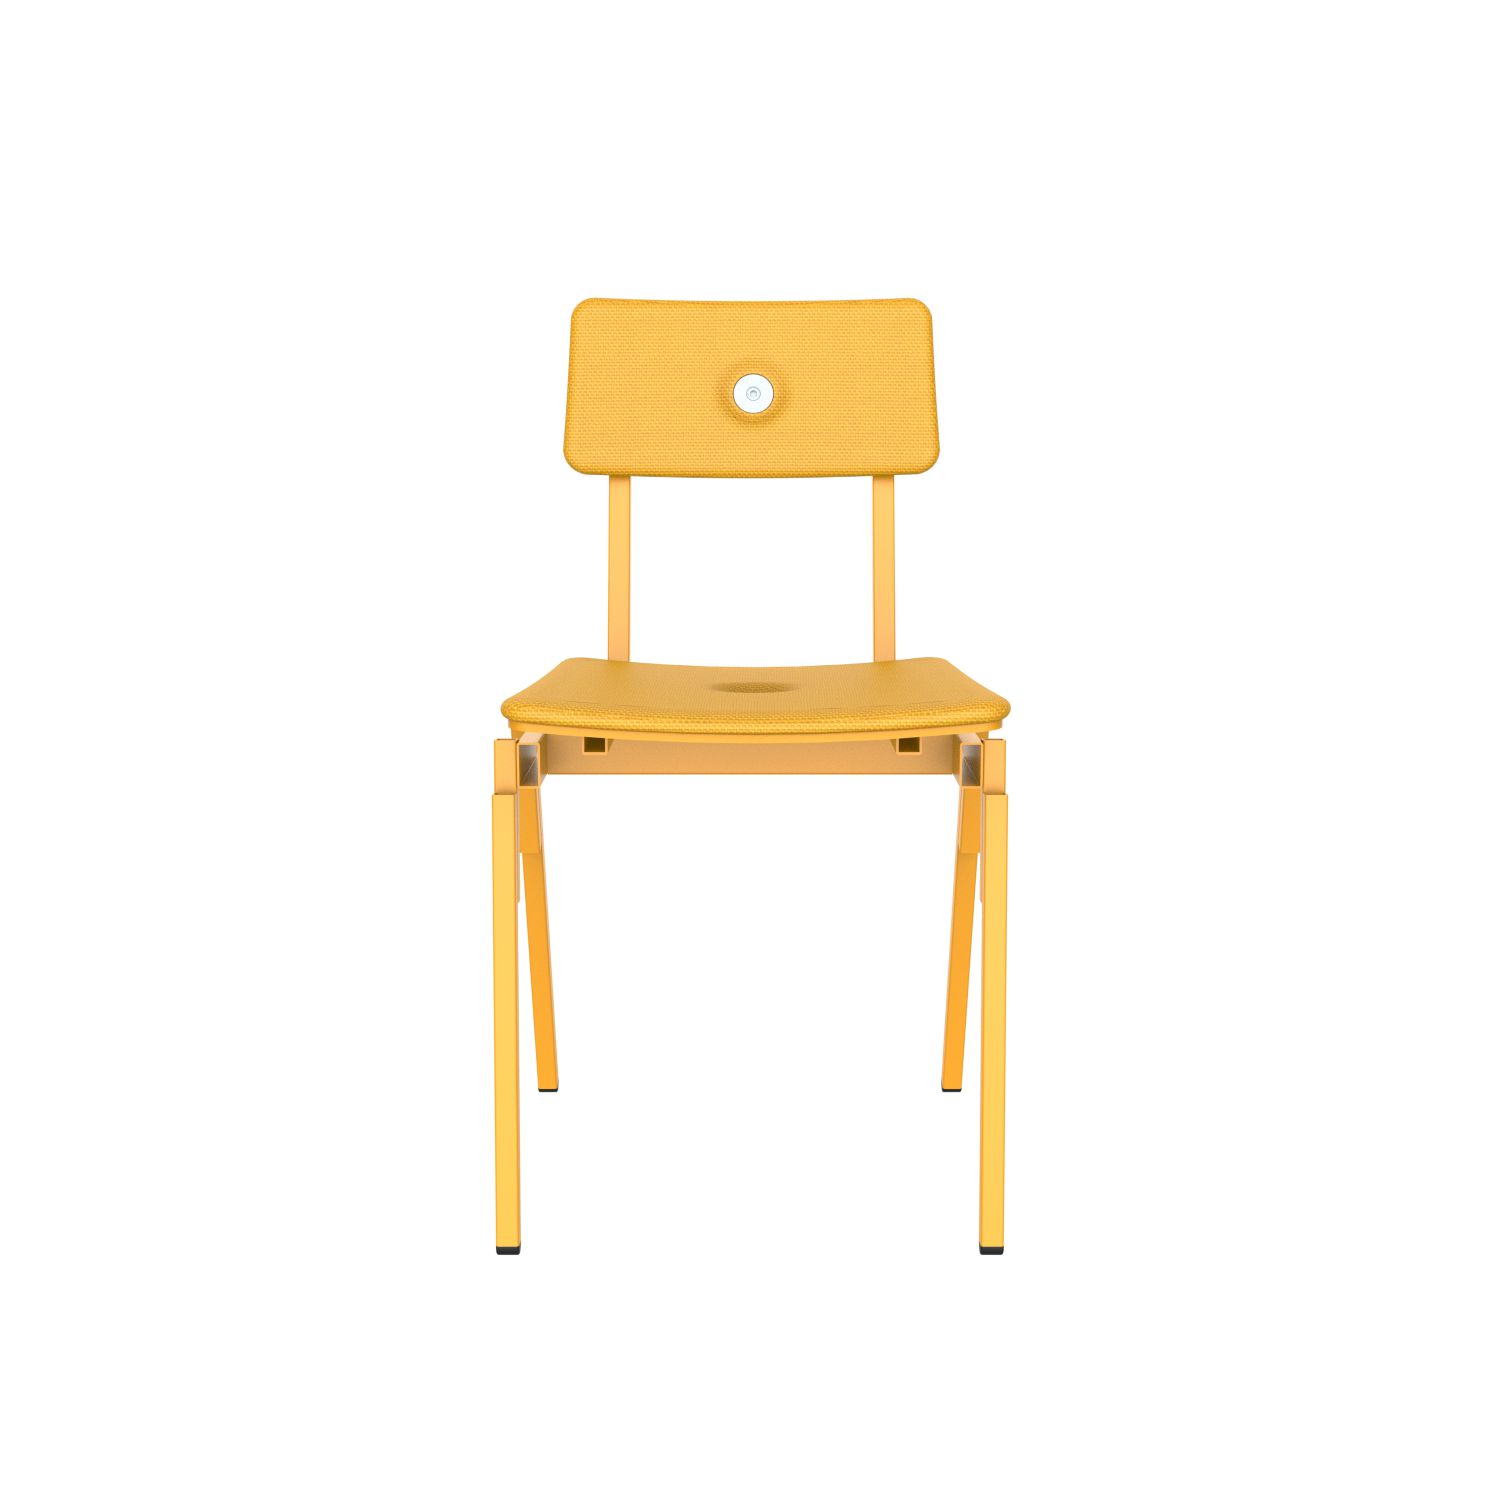 lensvelt piet hein eek mitw upholstered chair without armrests lemon yellow 051 signal yellow ral1003 hard leg ends